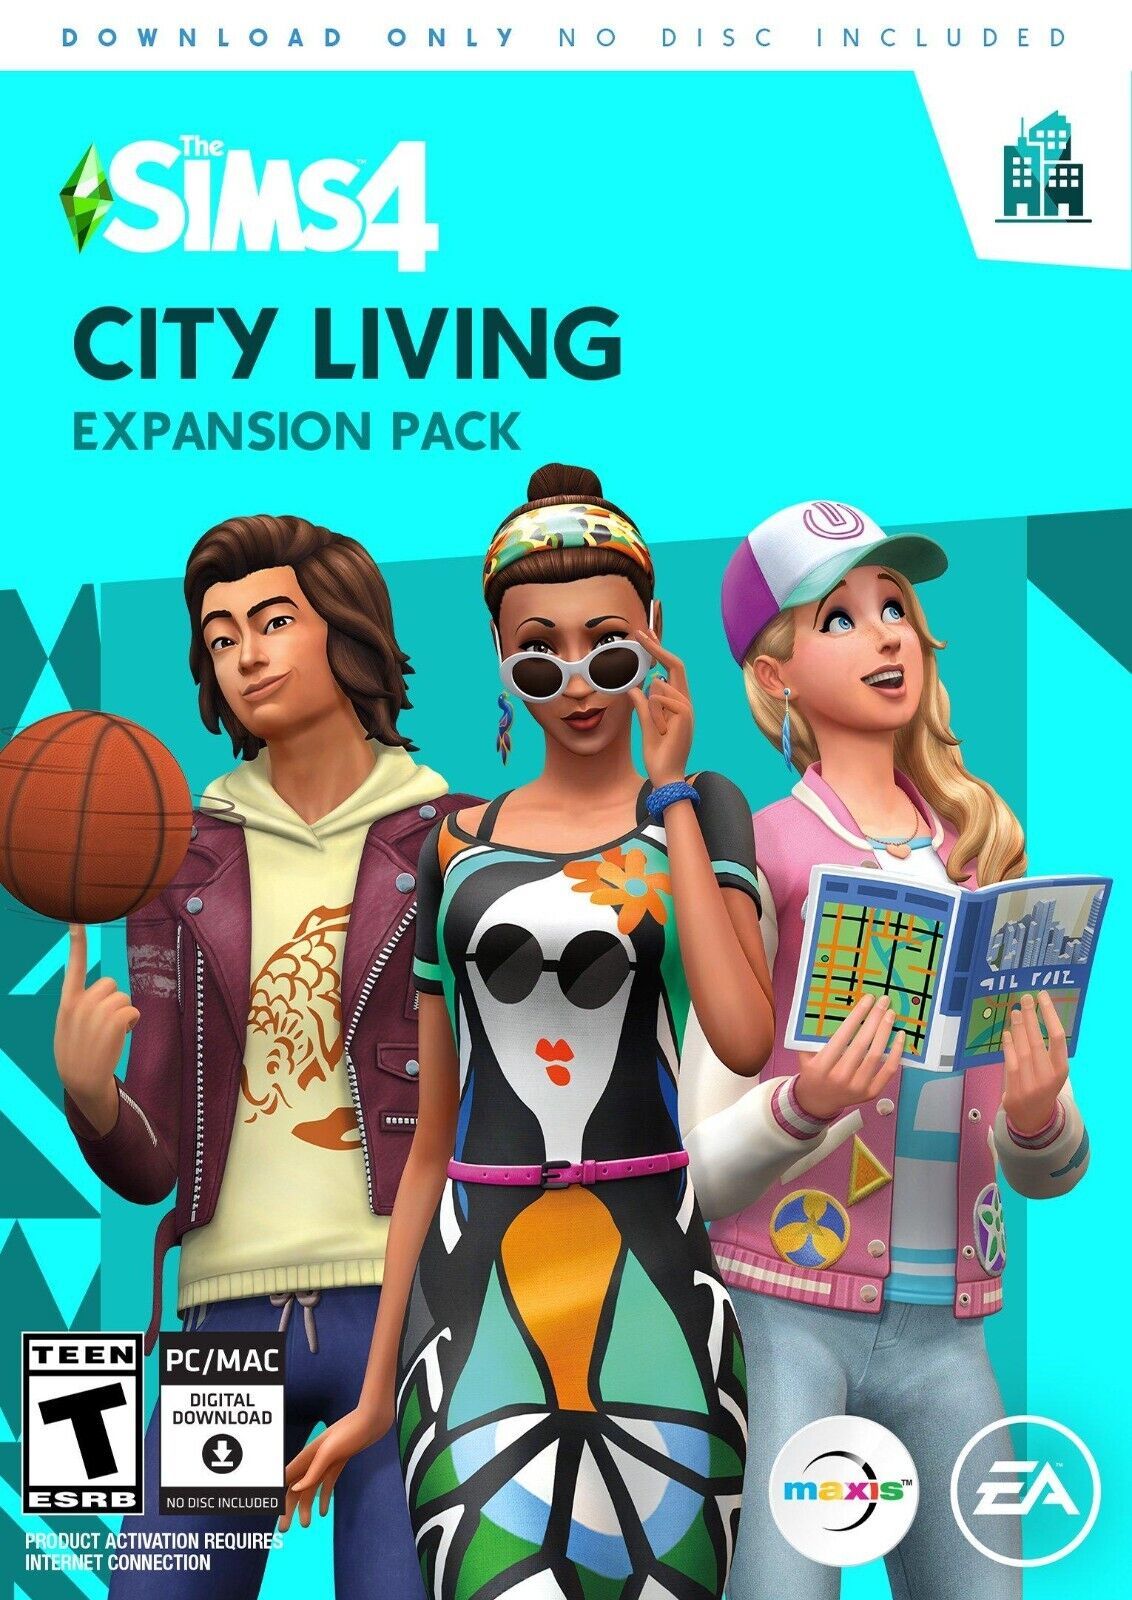 The Sims 4: City Living Expansion Pack - Windows PC & Mac - Brand NEW